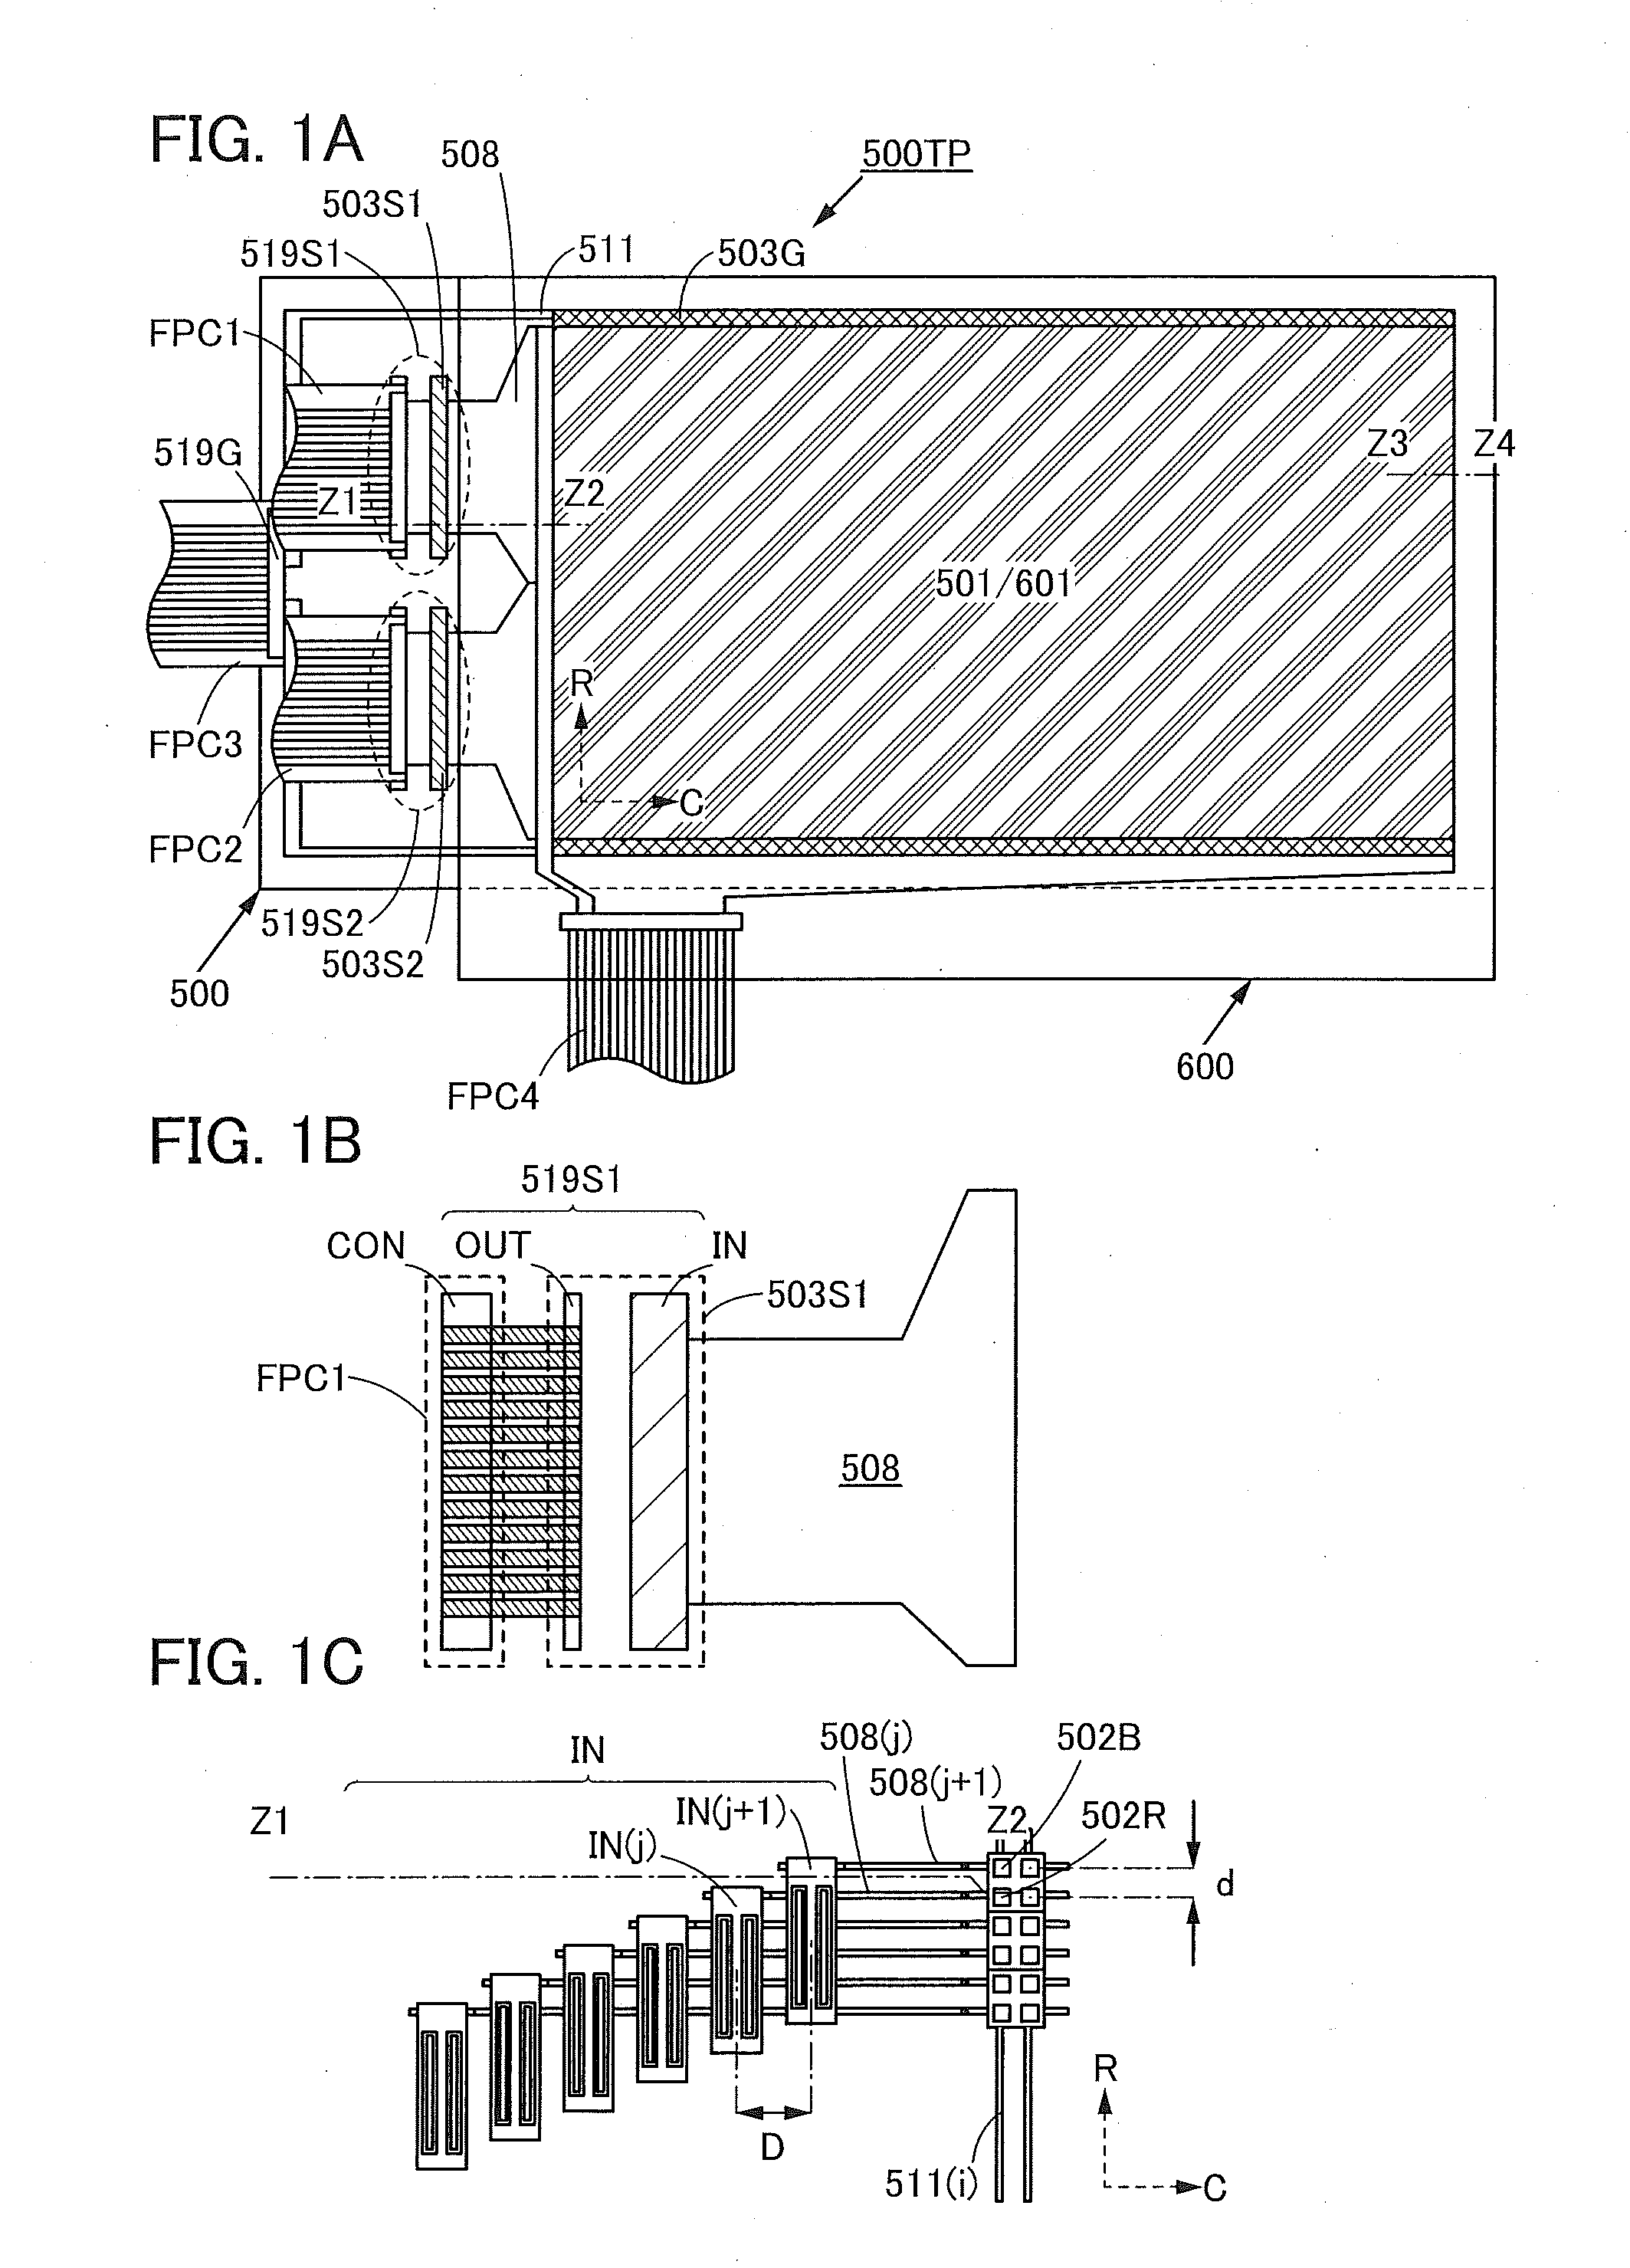 Display Panel, Input/output Device, and Data Processor